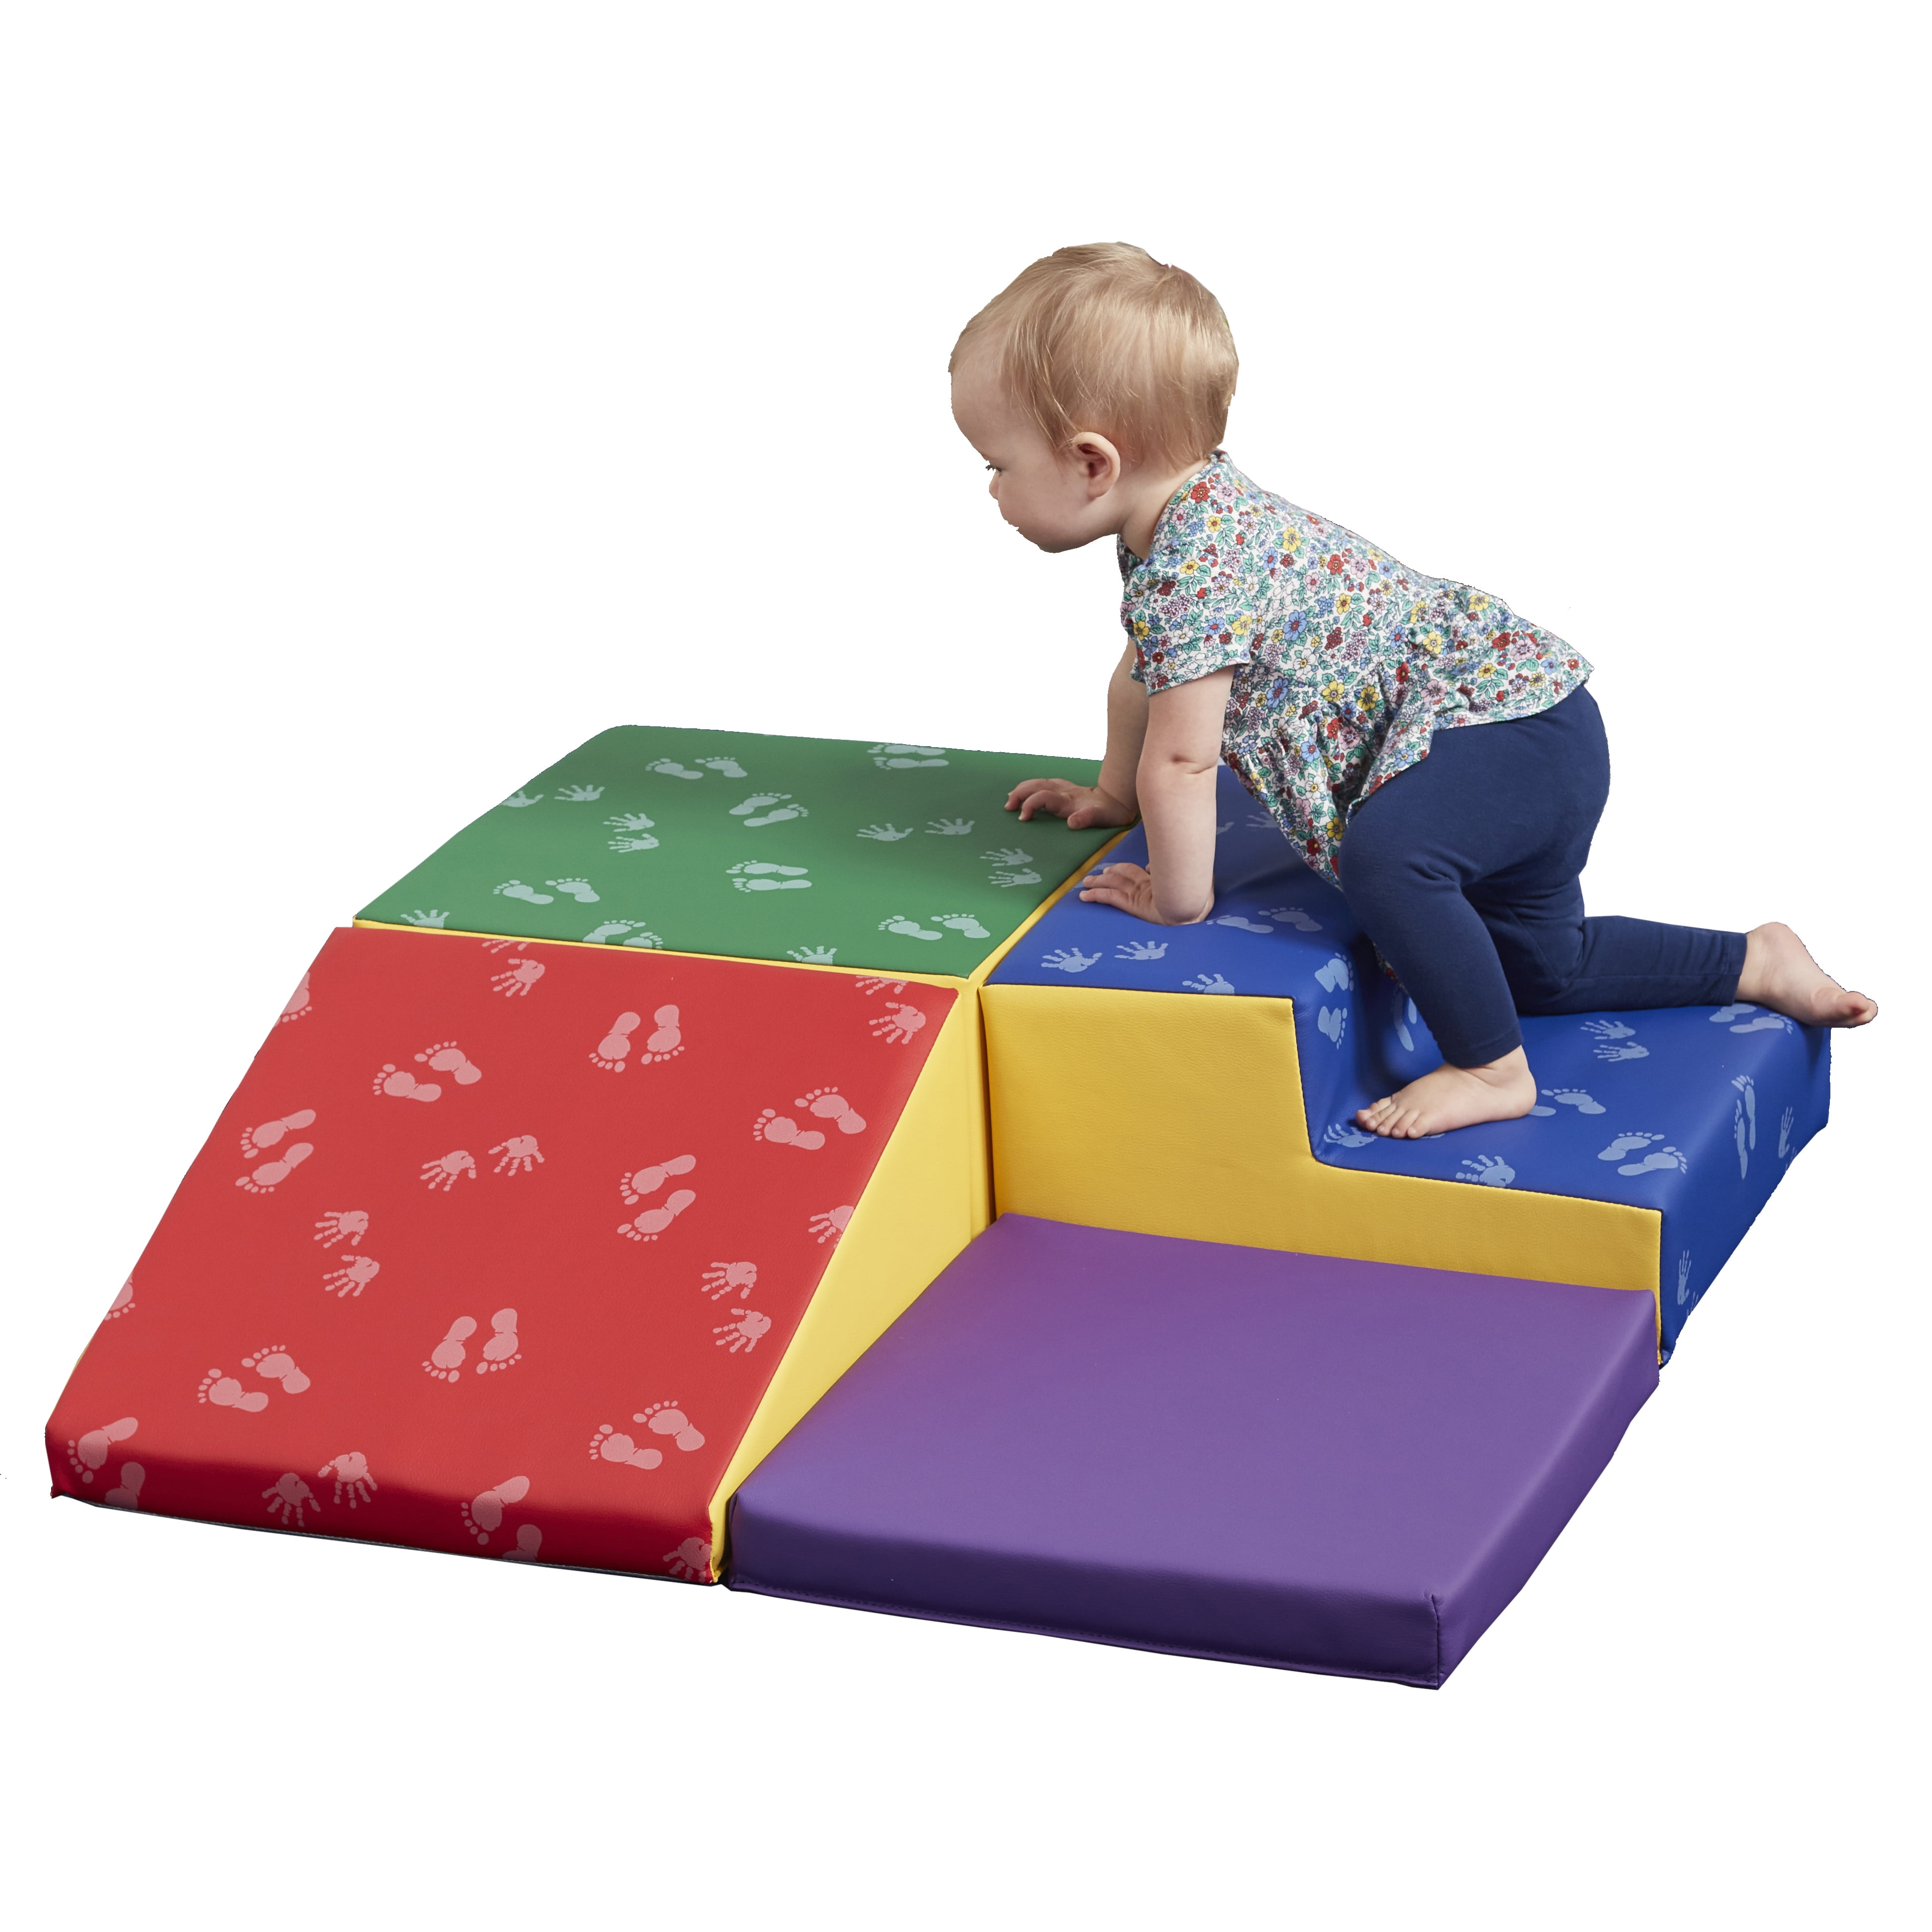 Soft Foam Play Set Indoor Active Play Structure for Toddlers and Kids Primary ECR4Kids SoftZone Little Me Foam Wall Climber 